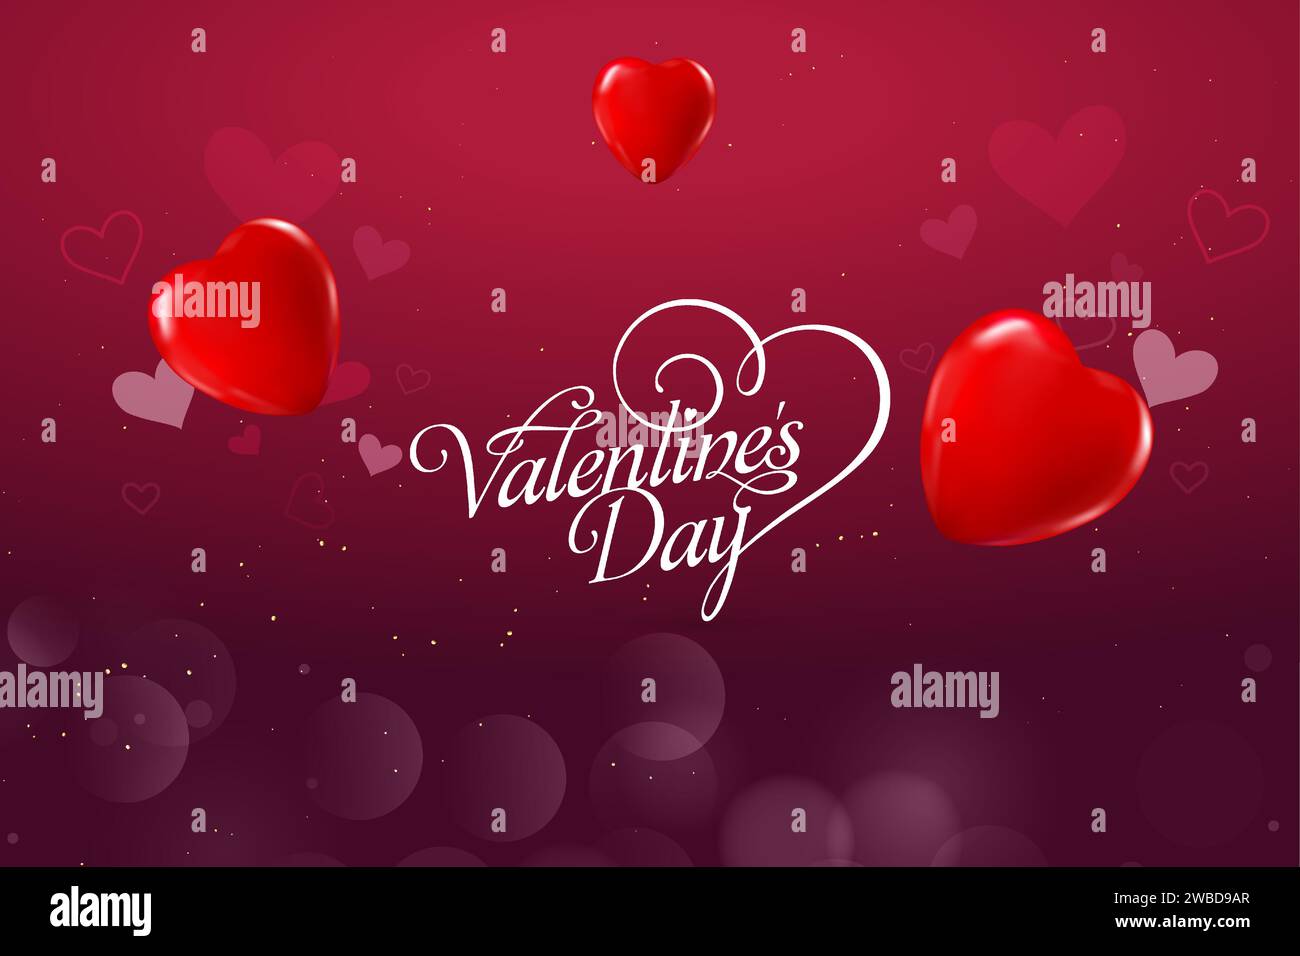 Valentines day background with heart pattern and typography of happy valentines day text . Stock Vector